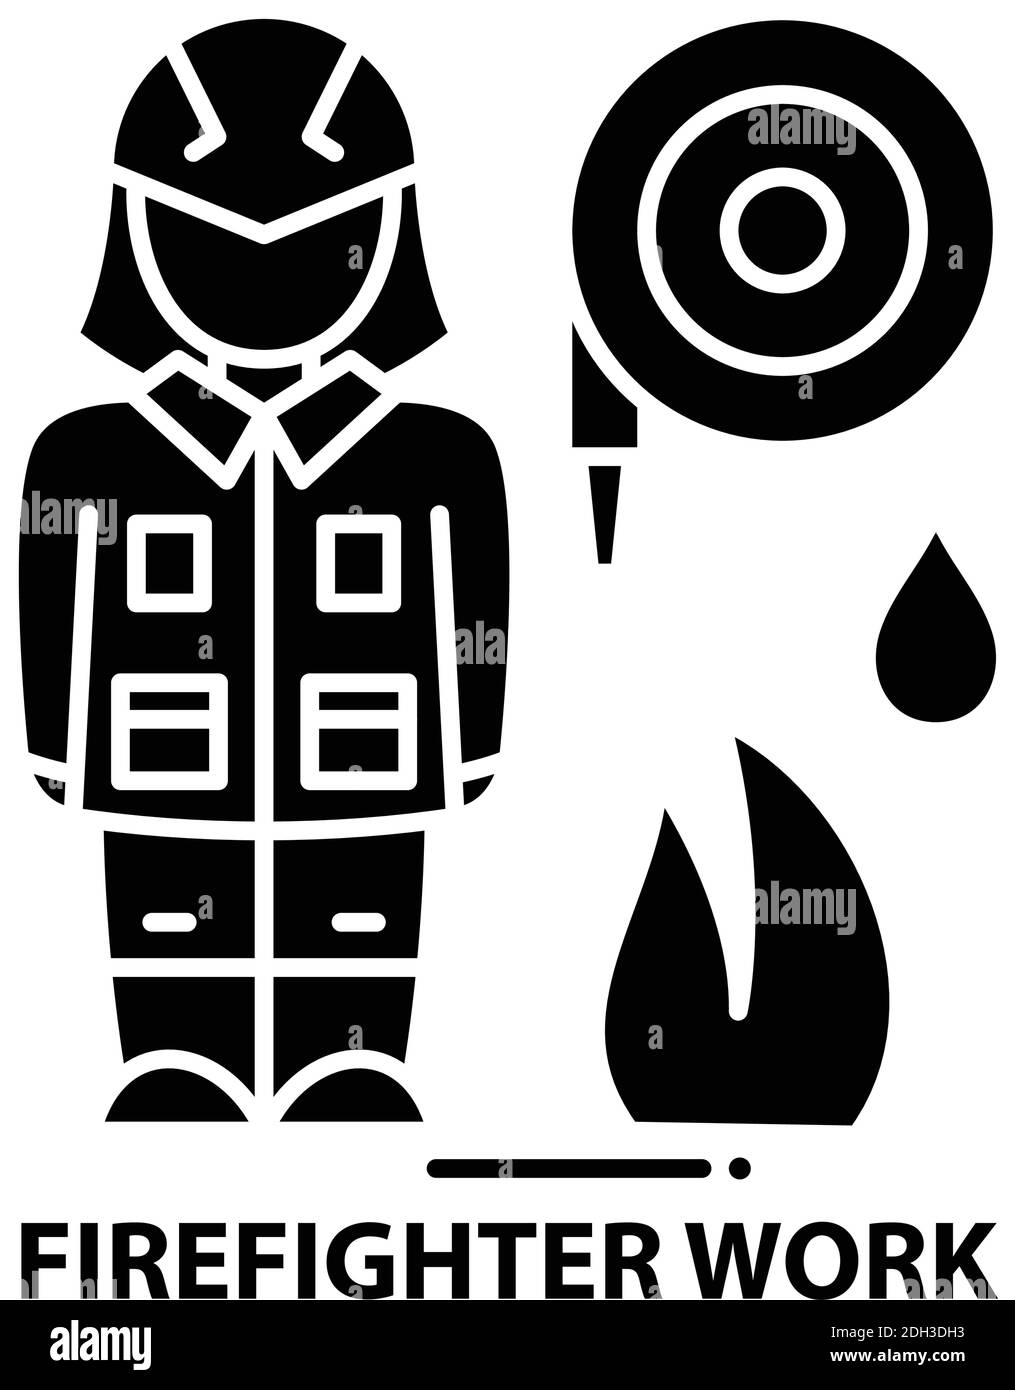 firefighter work icon, black vector sign with editable strokes, concept illustration Stock Vector